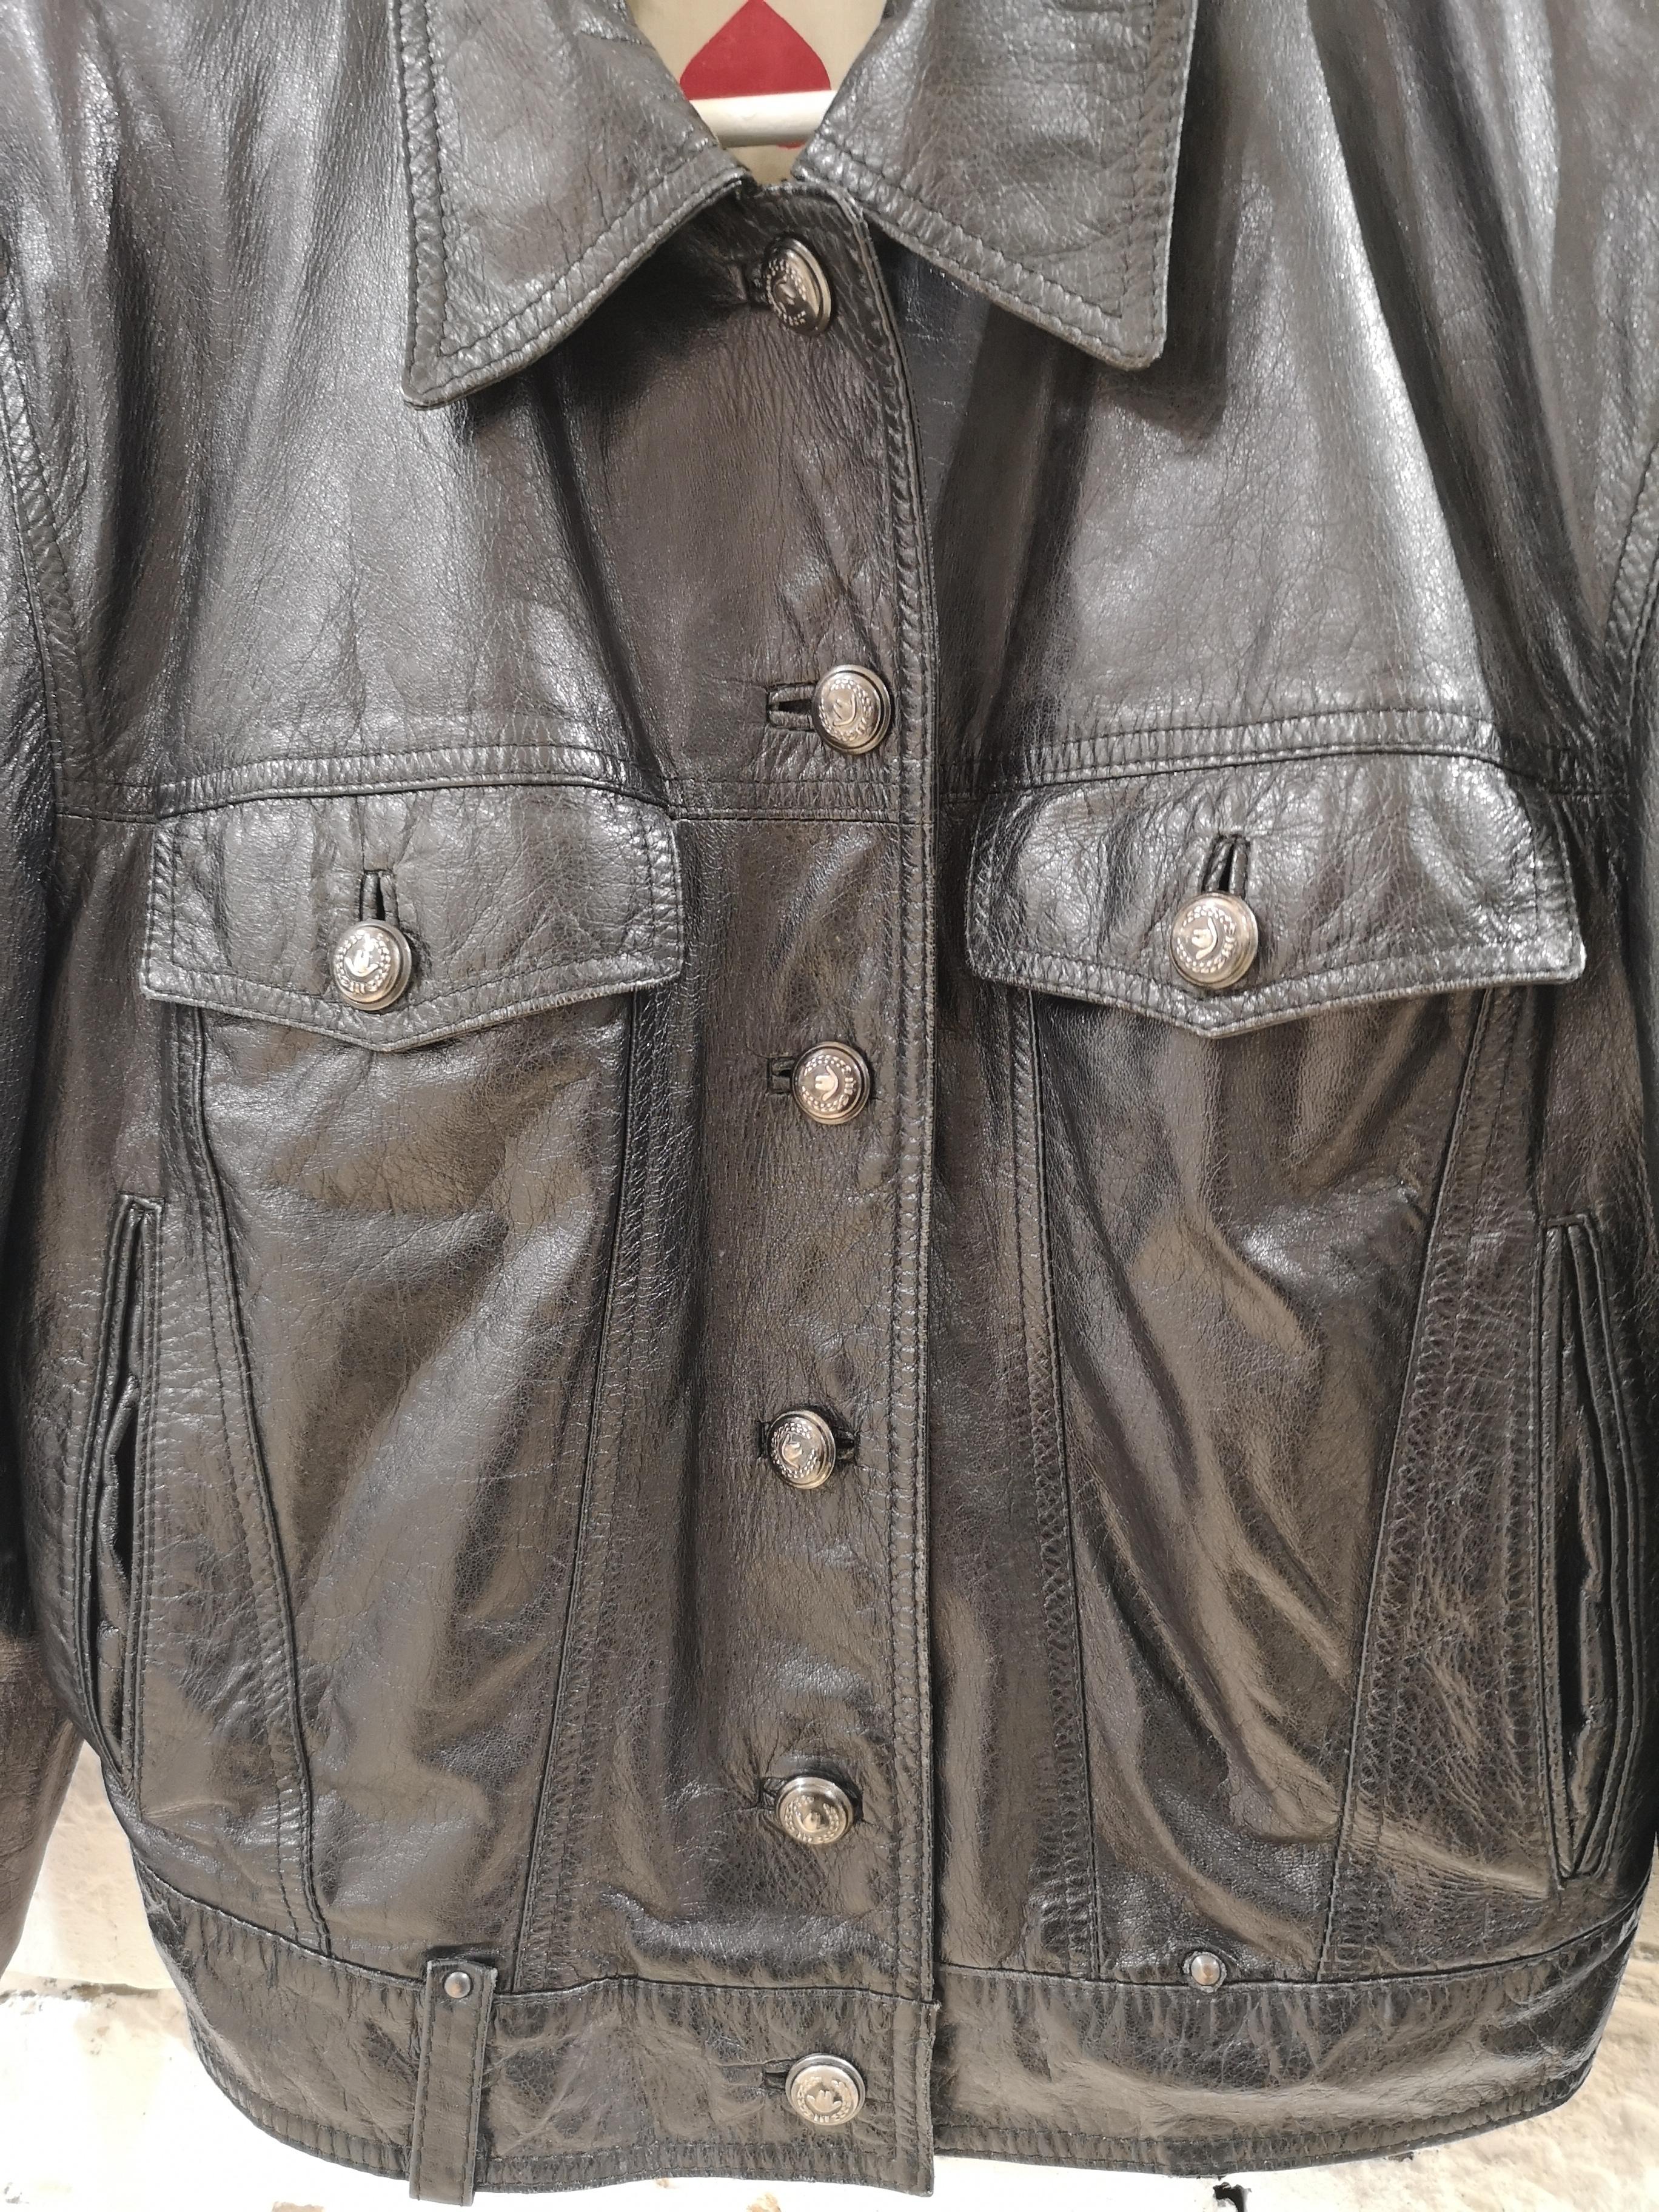 Moschino Black Vestire Humanum Est Jacket

totally made in italy in size L 
not real leather
on the back Vestire Humanum Est 
lining is faboulous
